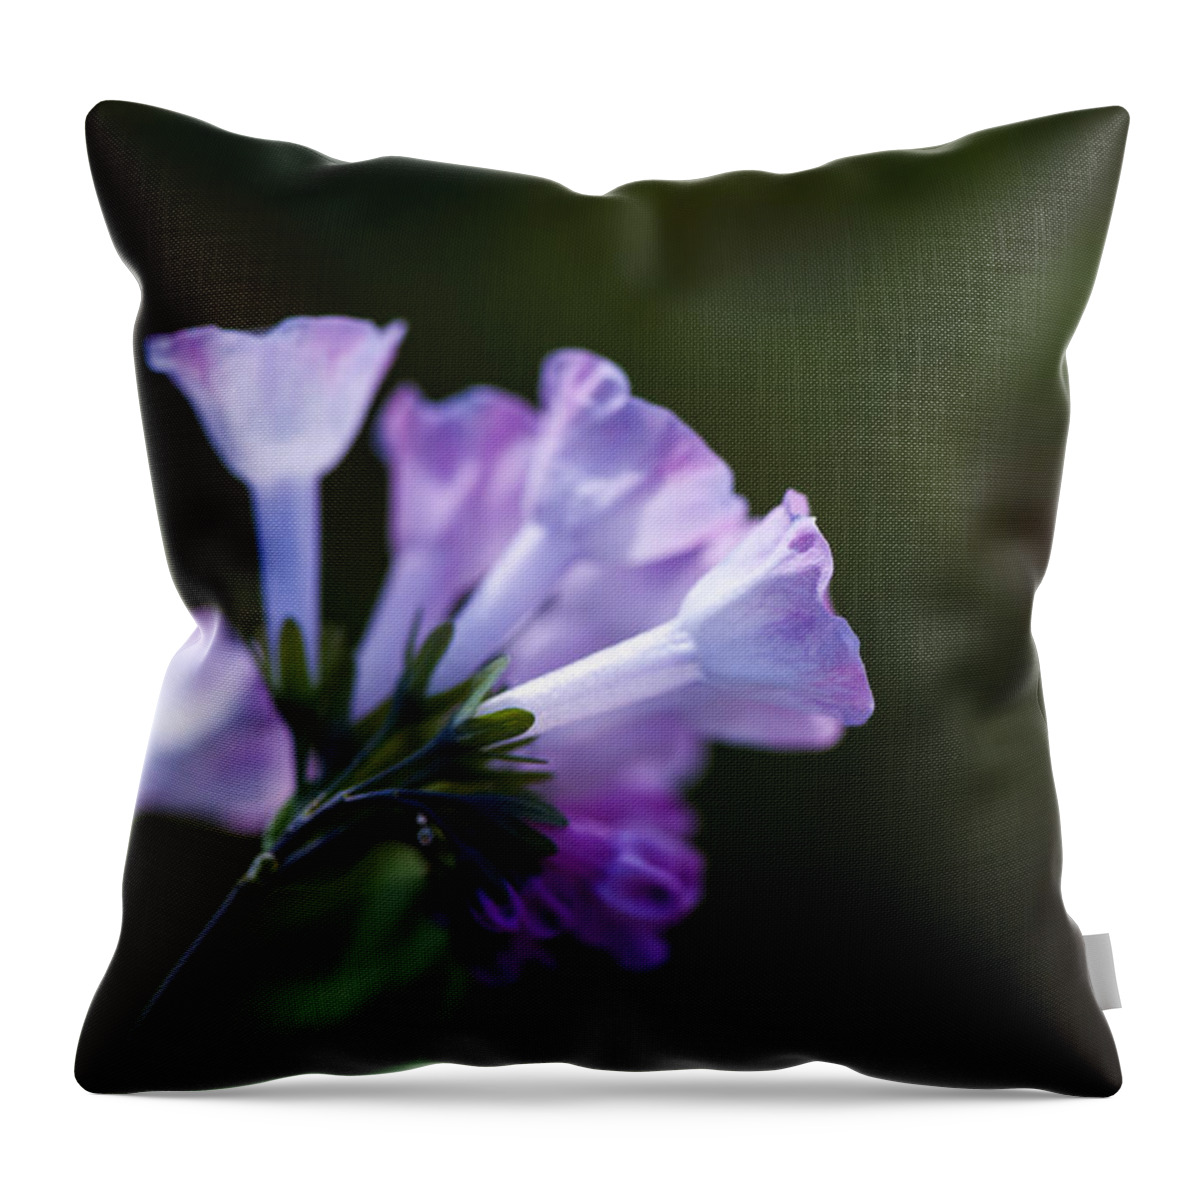  Throw Pillow featuring the photograph Morning bluebells by Dan Hefle